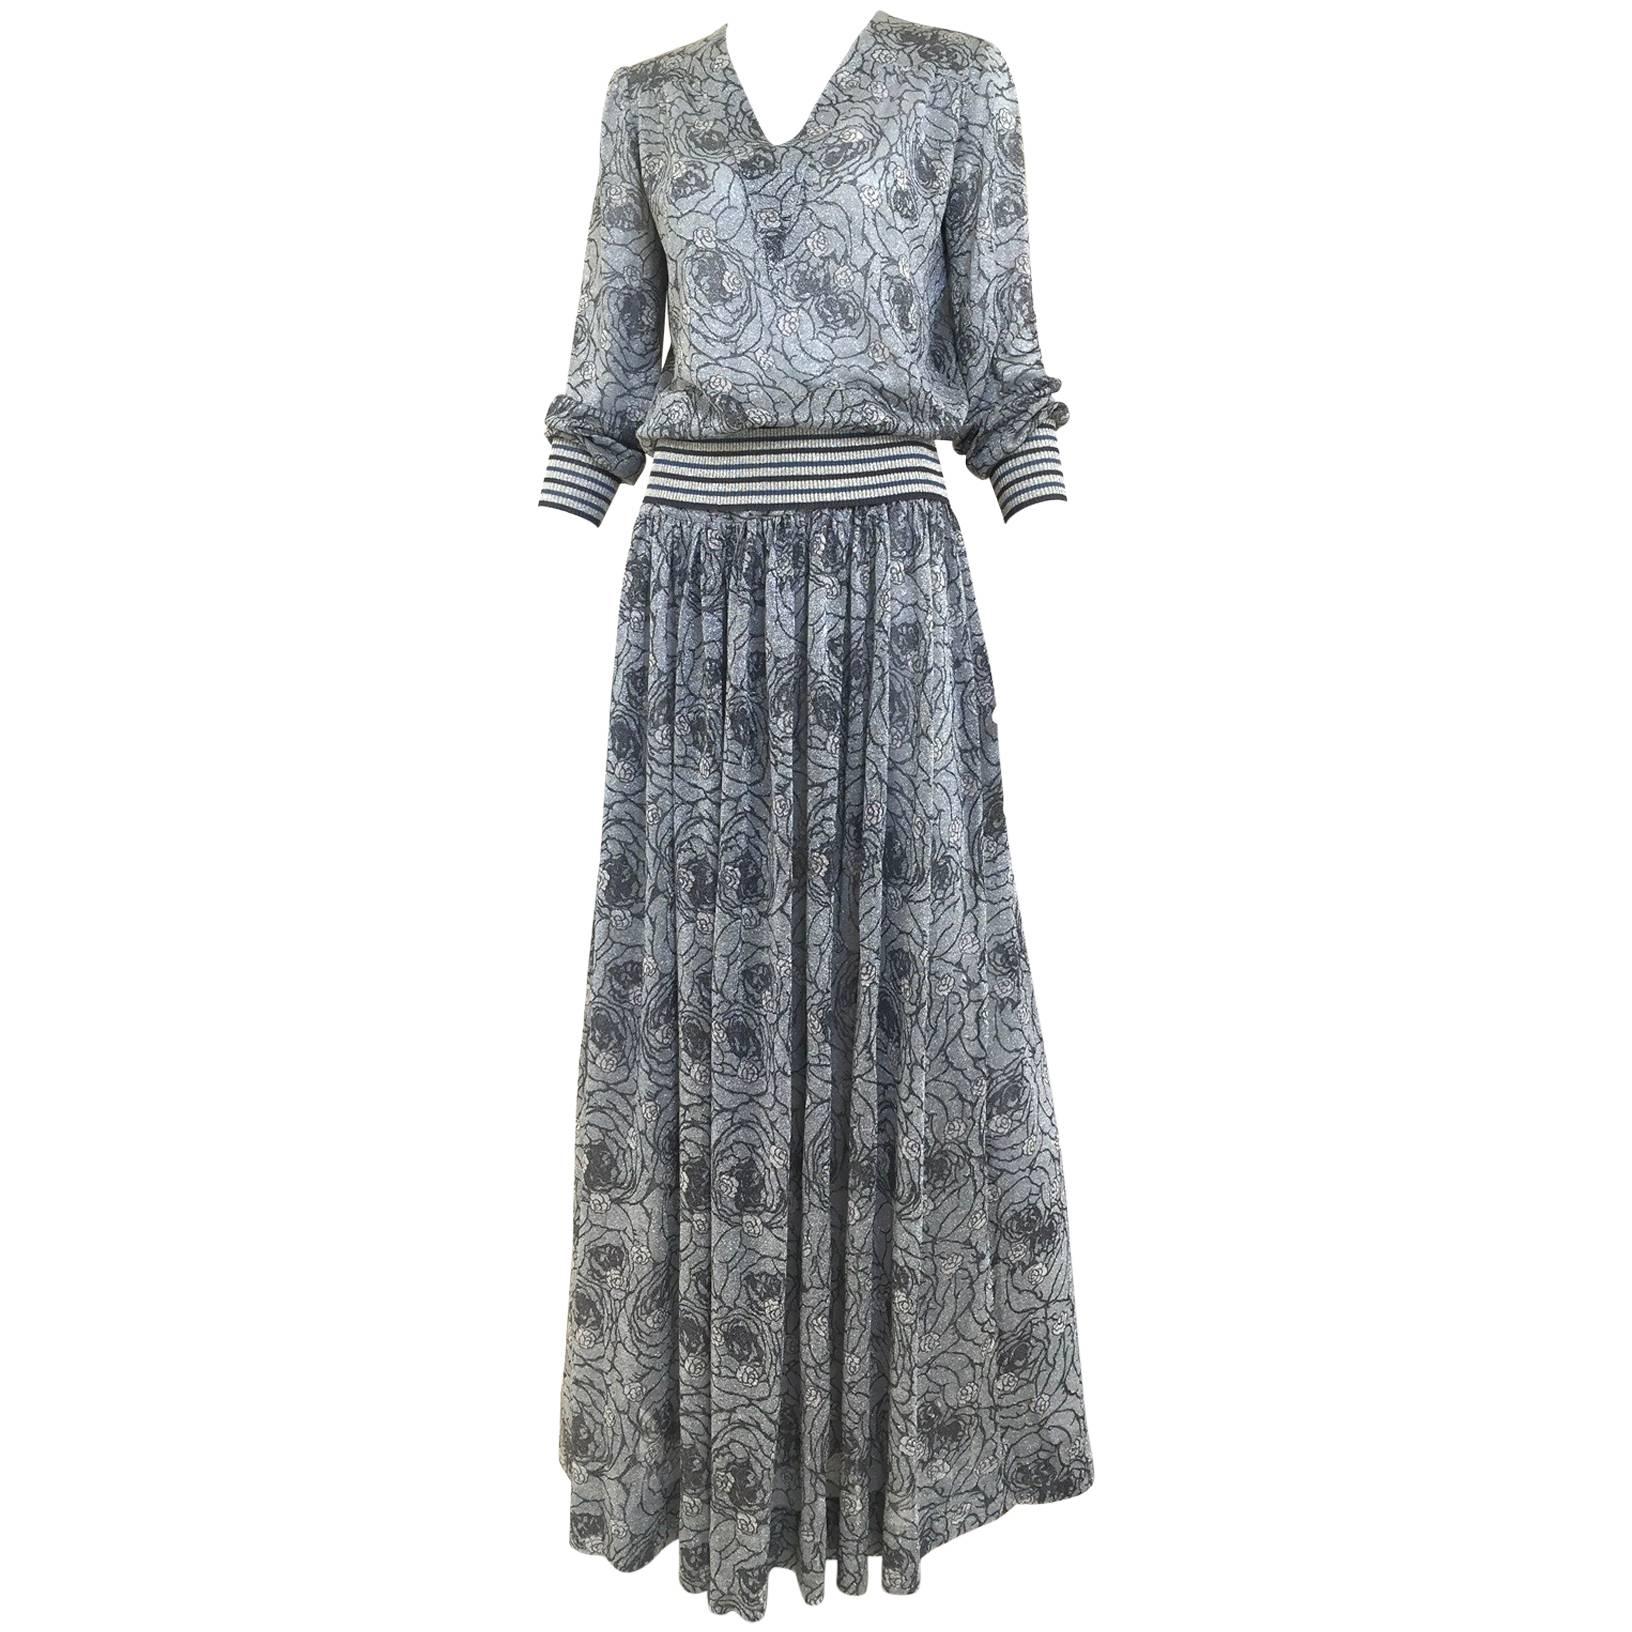 70s Missoni metallic grey and blue knit top and skirt set